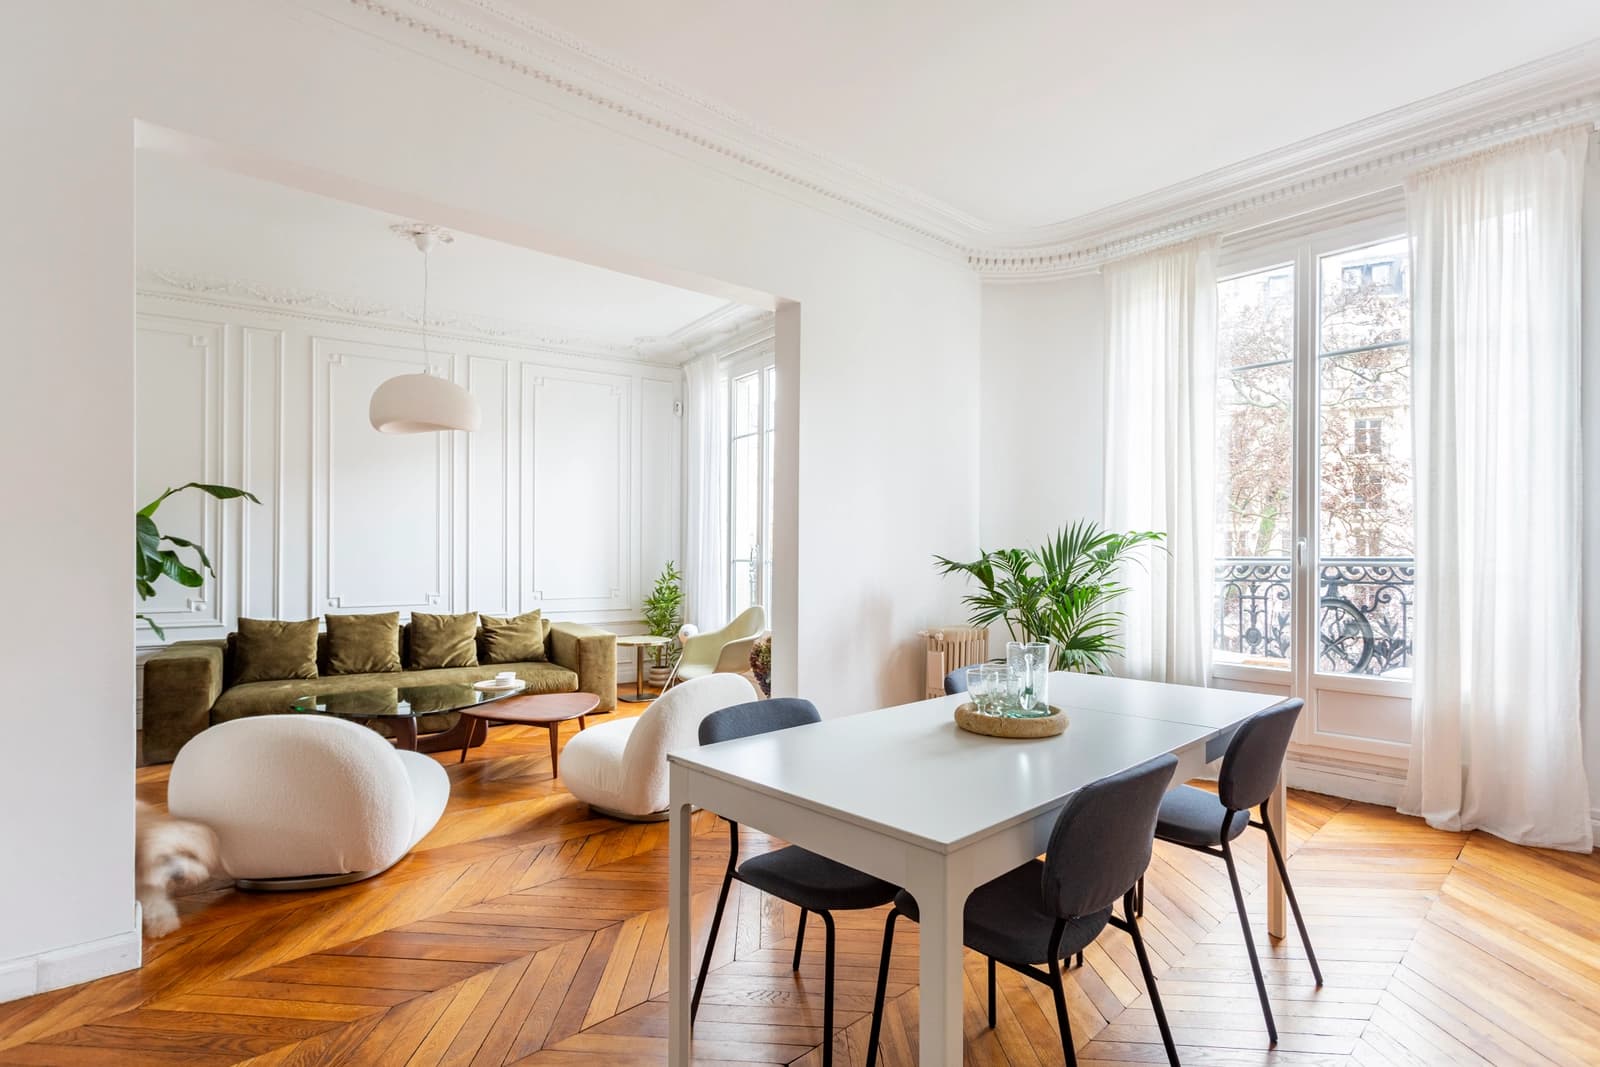 Space Haussmannian apartment overlooking tree-lined square - 3